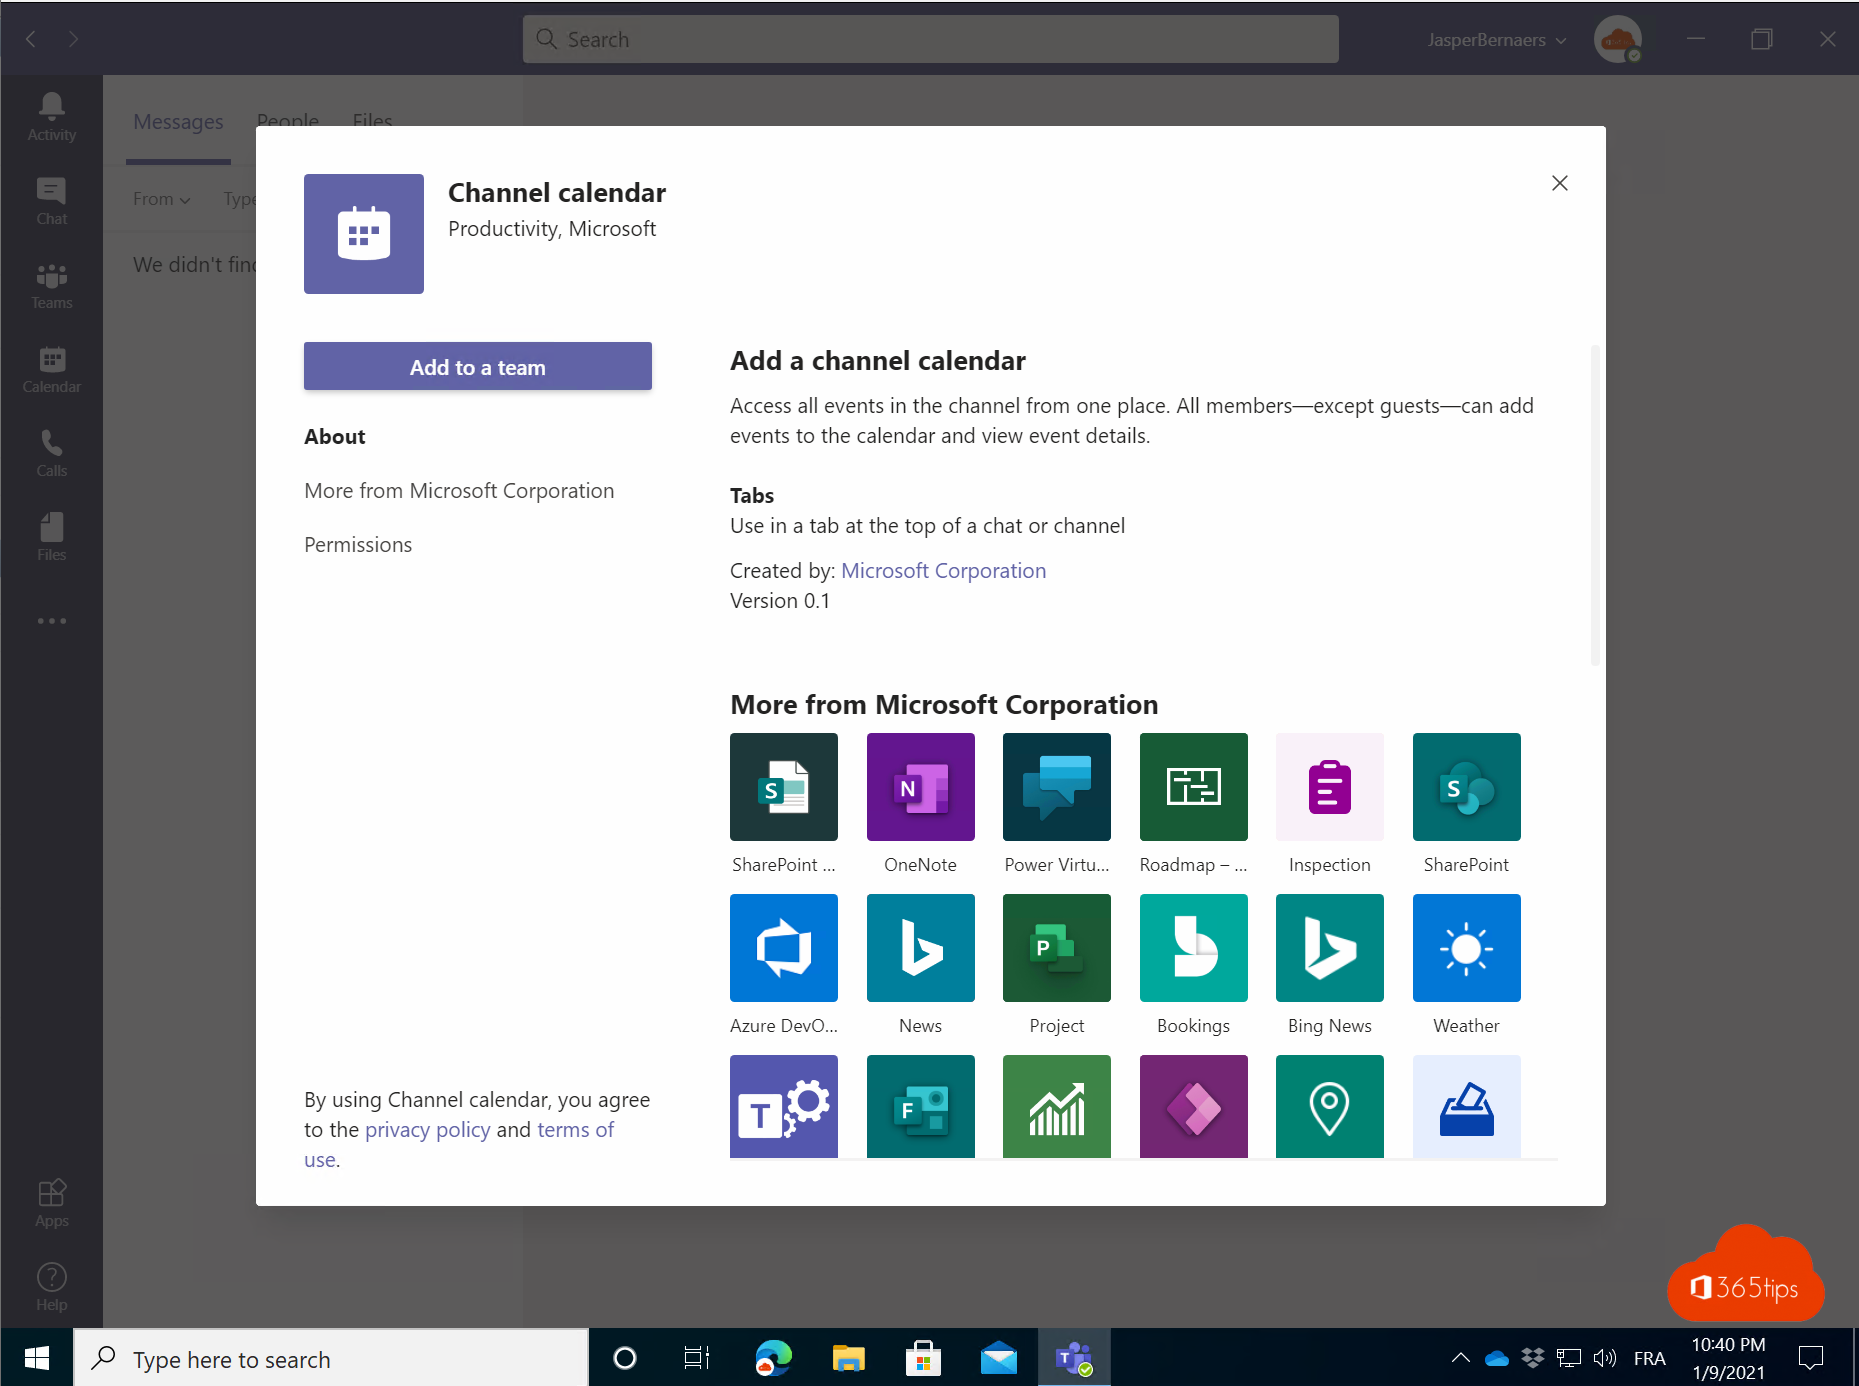 Activate and use "Channel Calendar" manual in Microsoft Teams